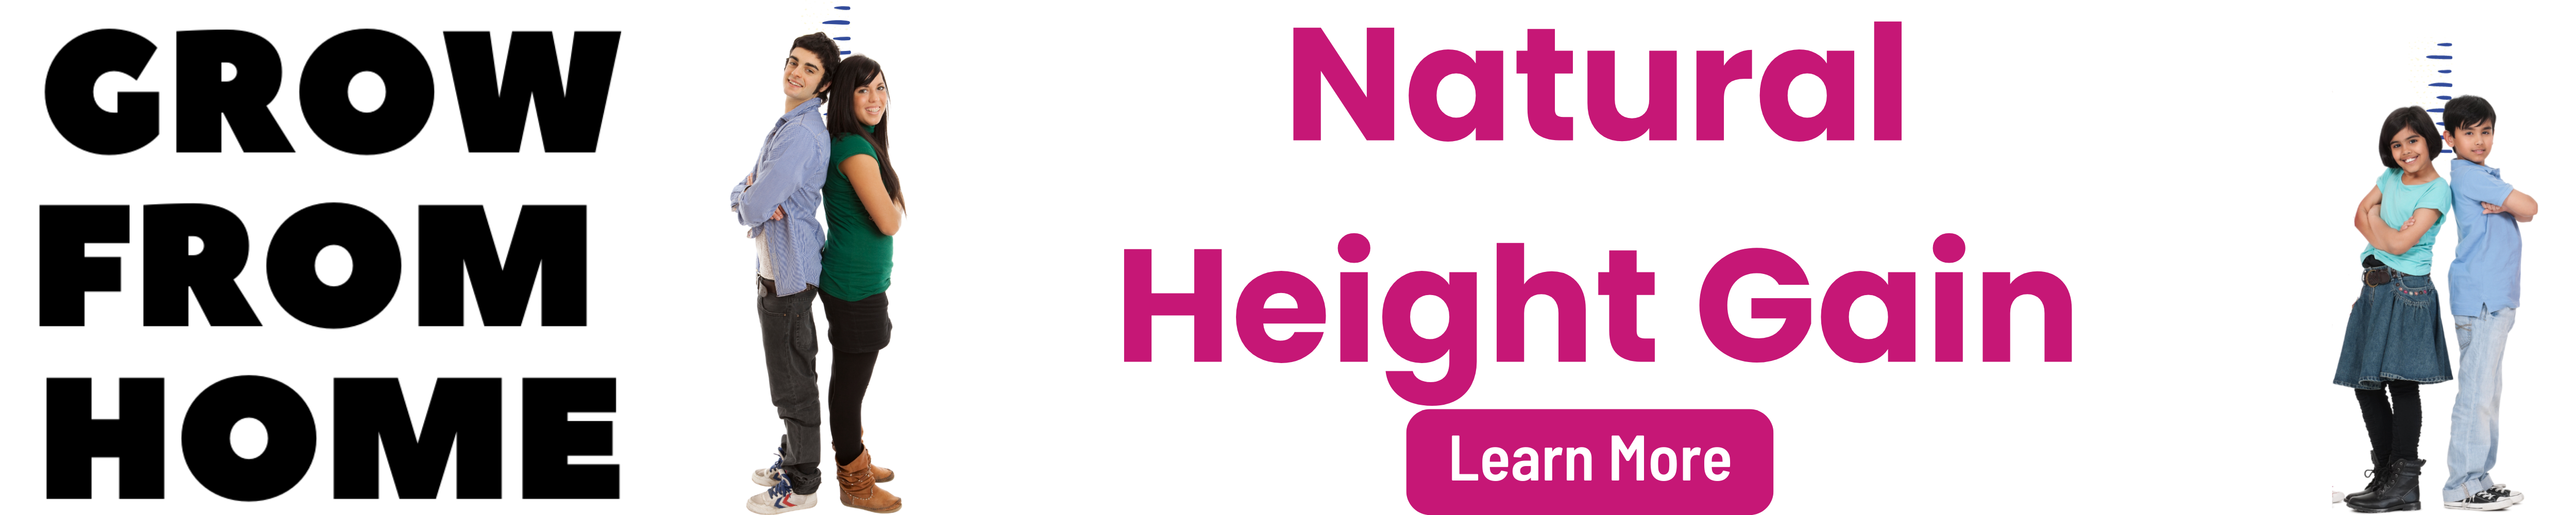 Natural Height Gain-3